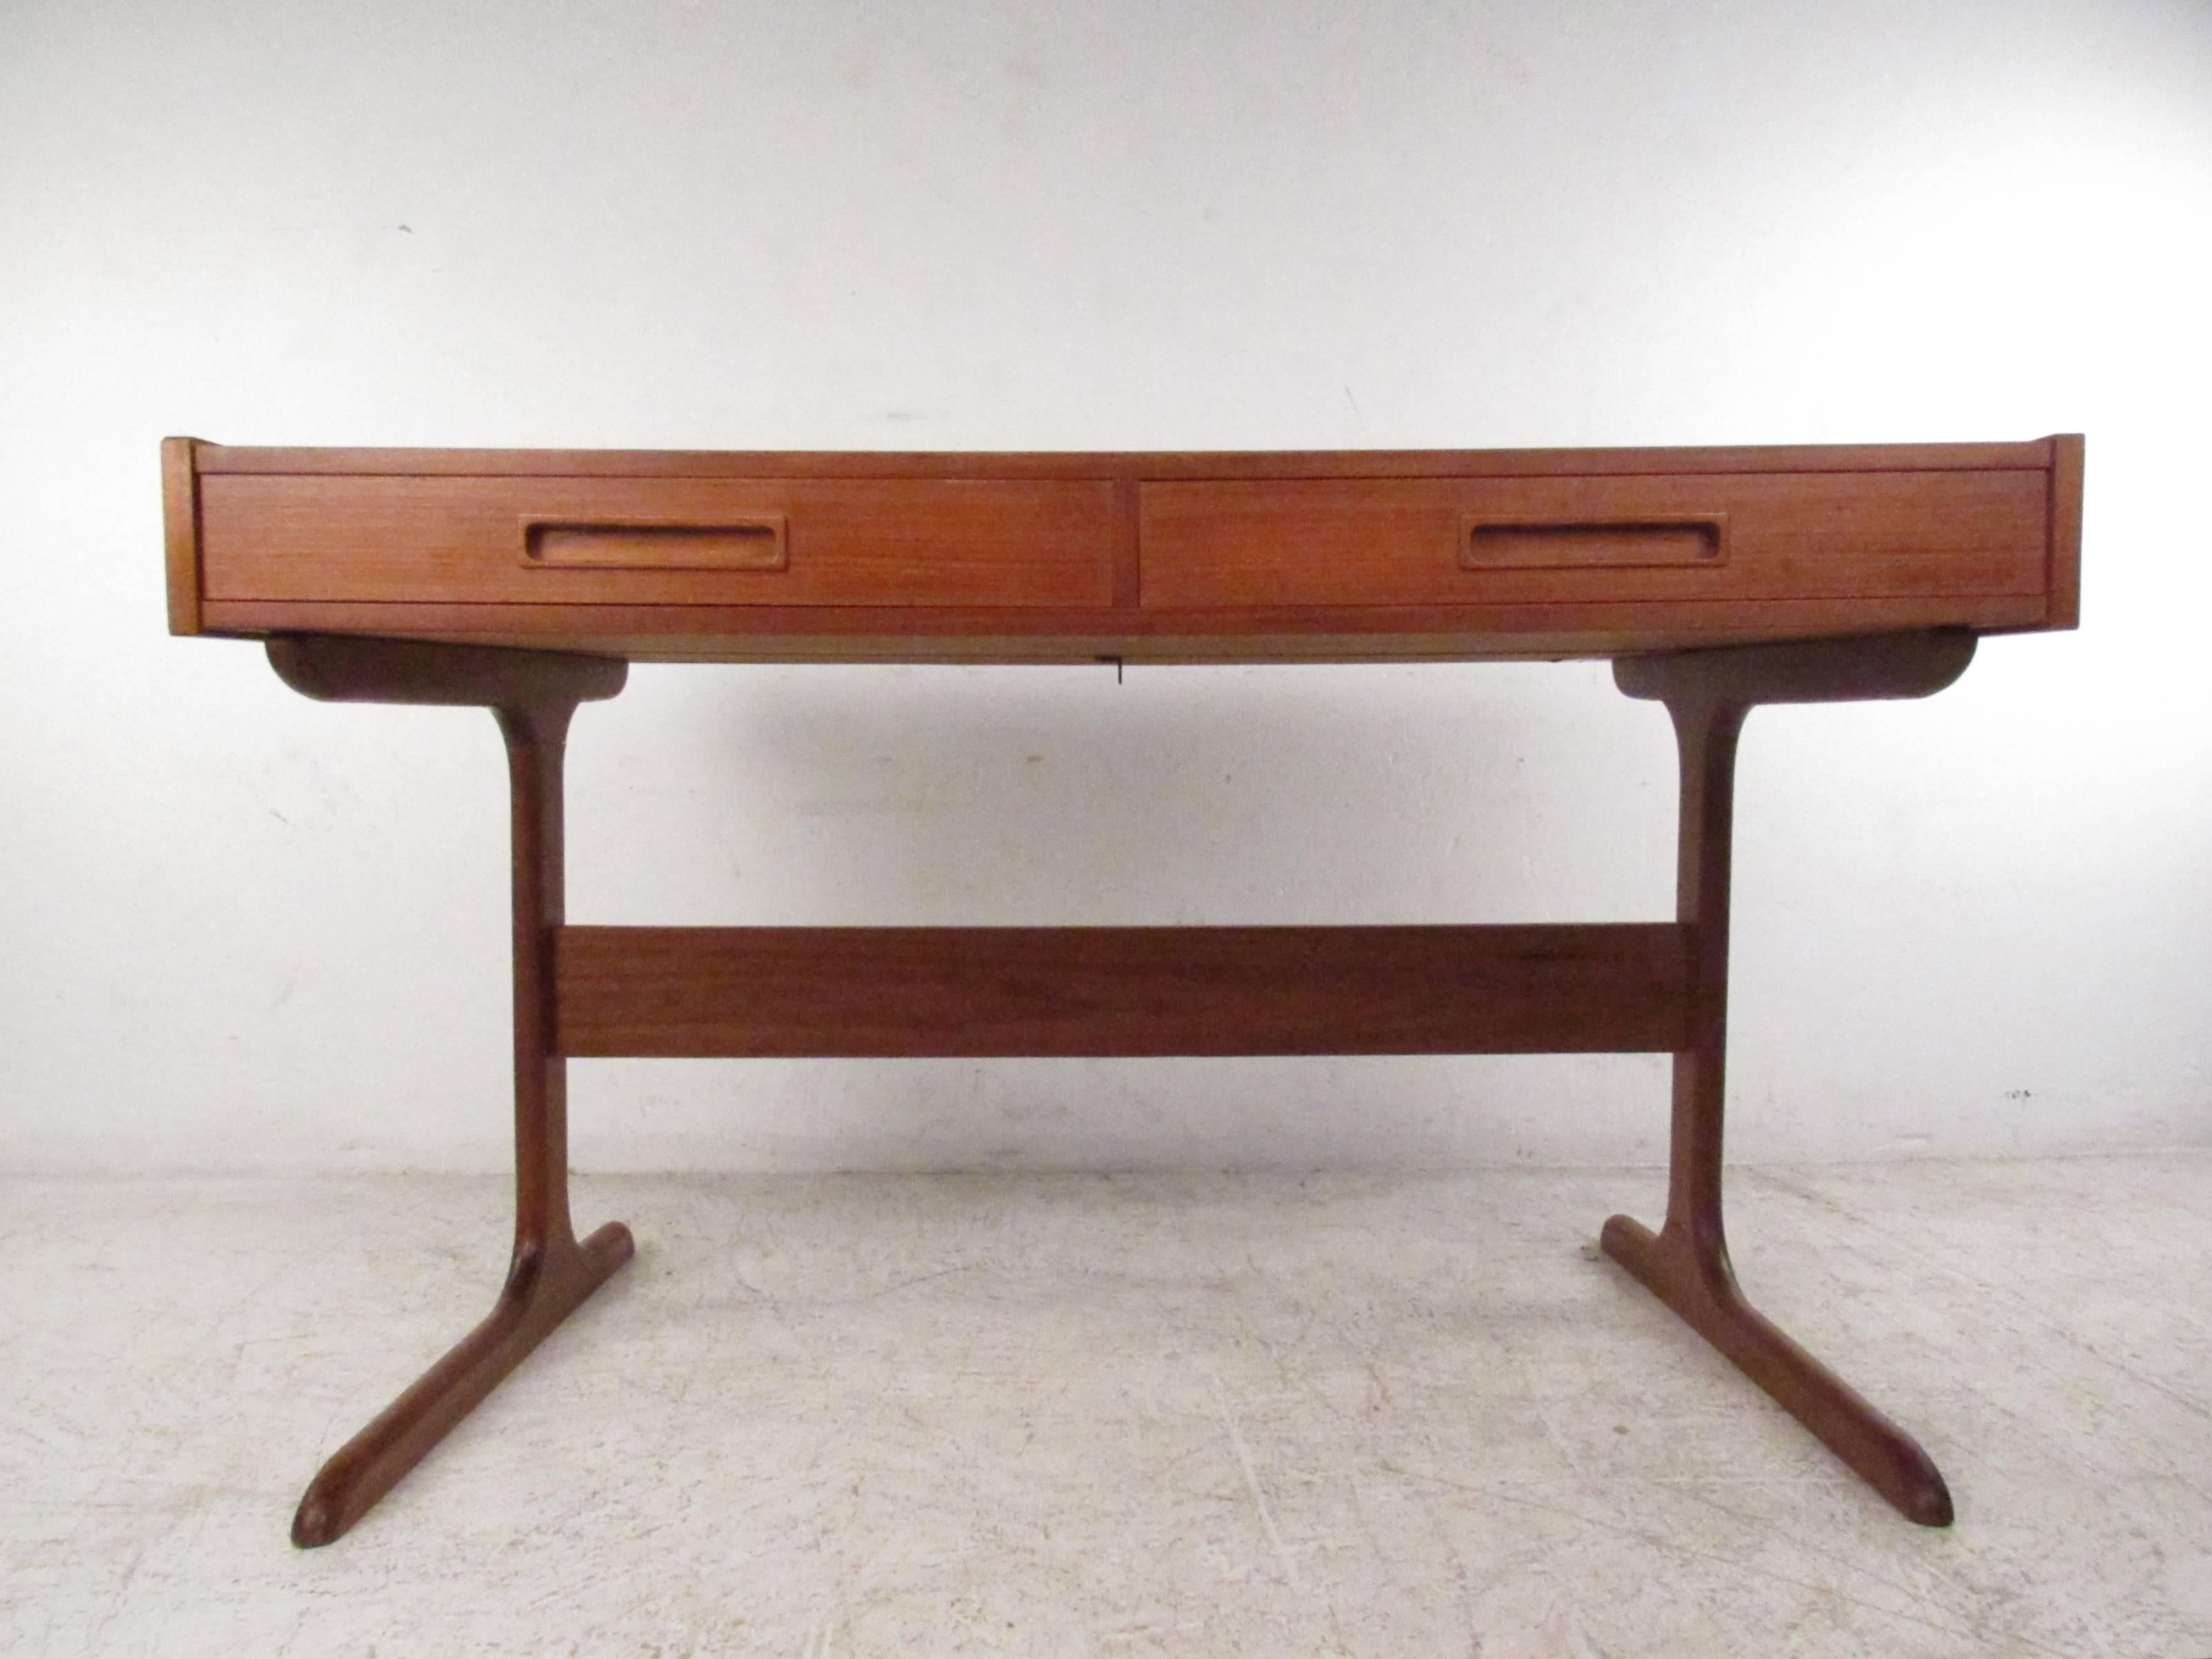 This stylish Mid-Century desk features vintage teak finish, two-drawer storage and a unique hidden organizational cubby. Sculpted sled legs feature a stretcher for added support, while the finished teak back makes this a suitable desk or writing